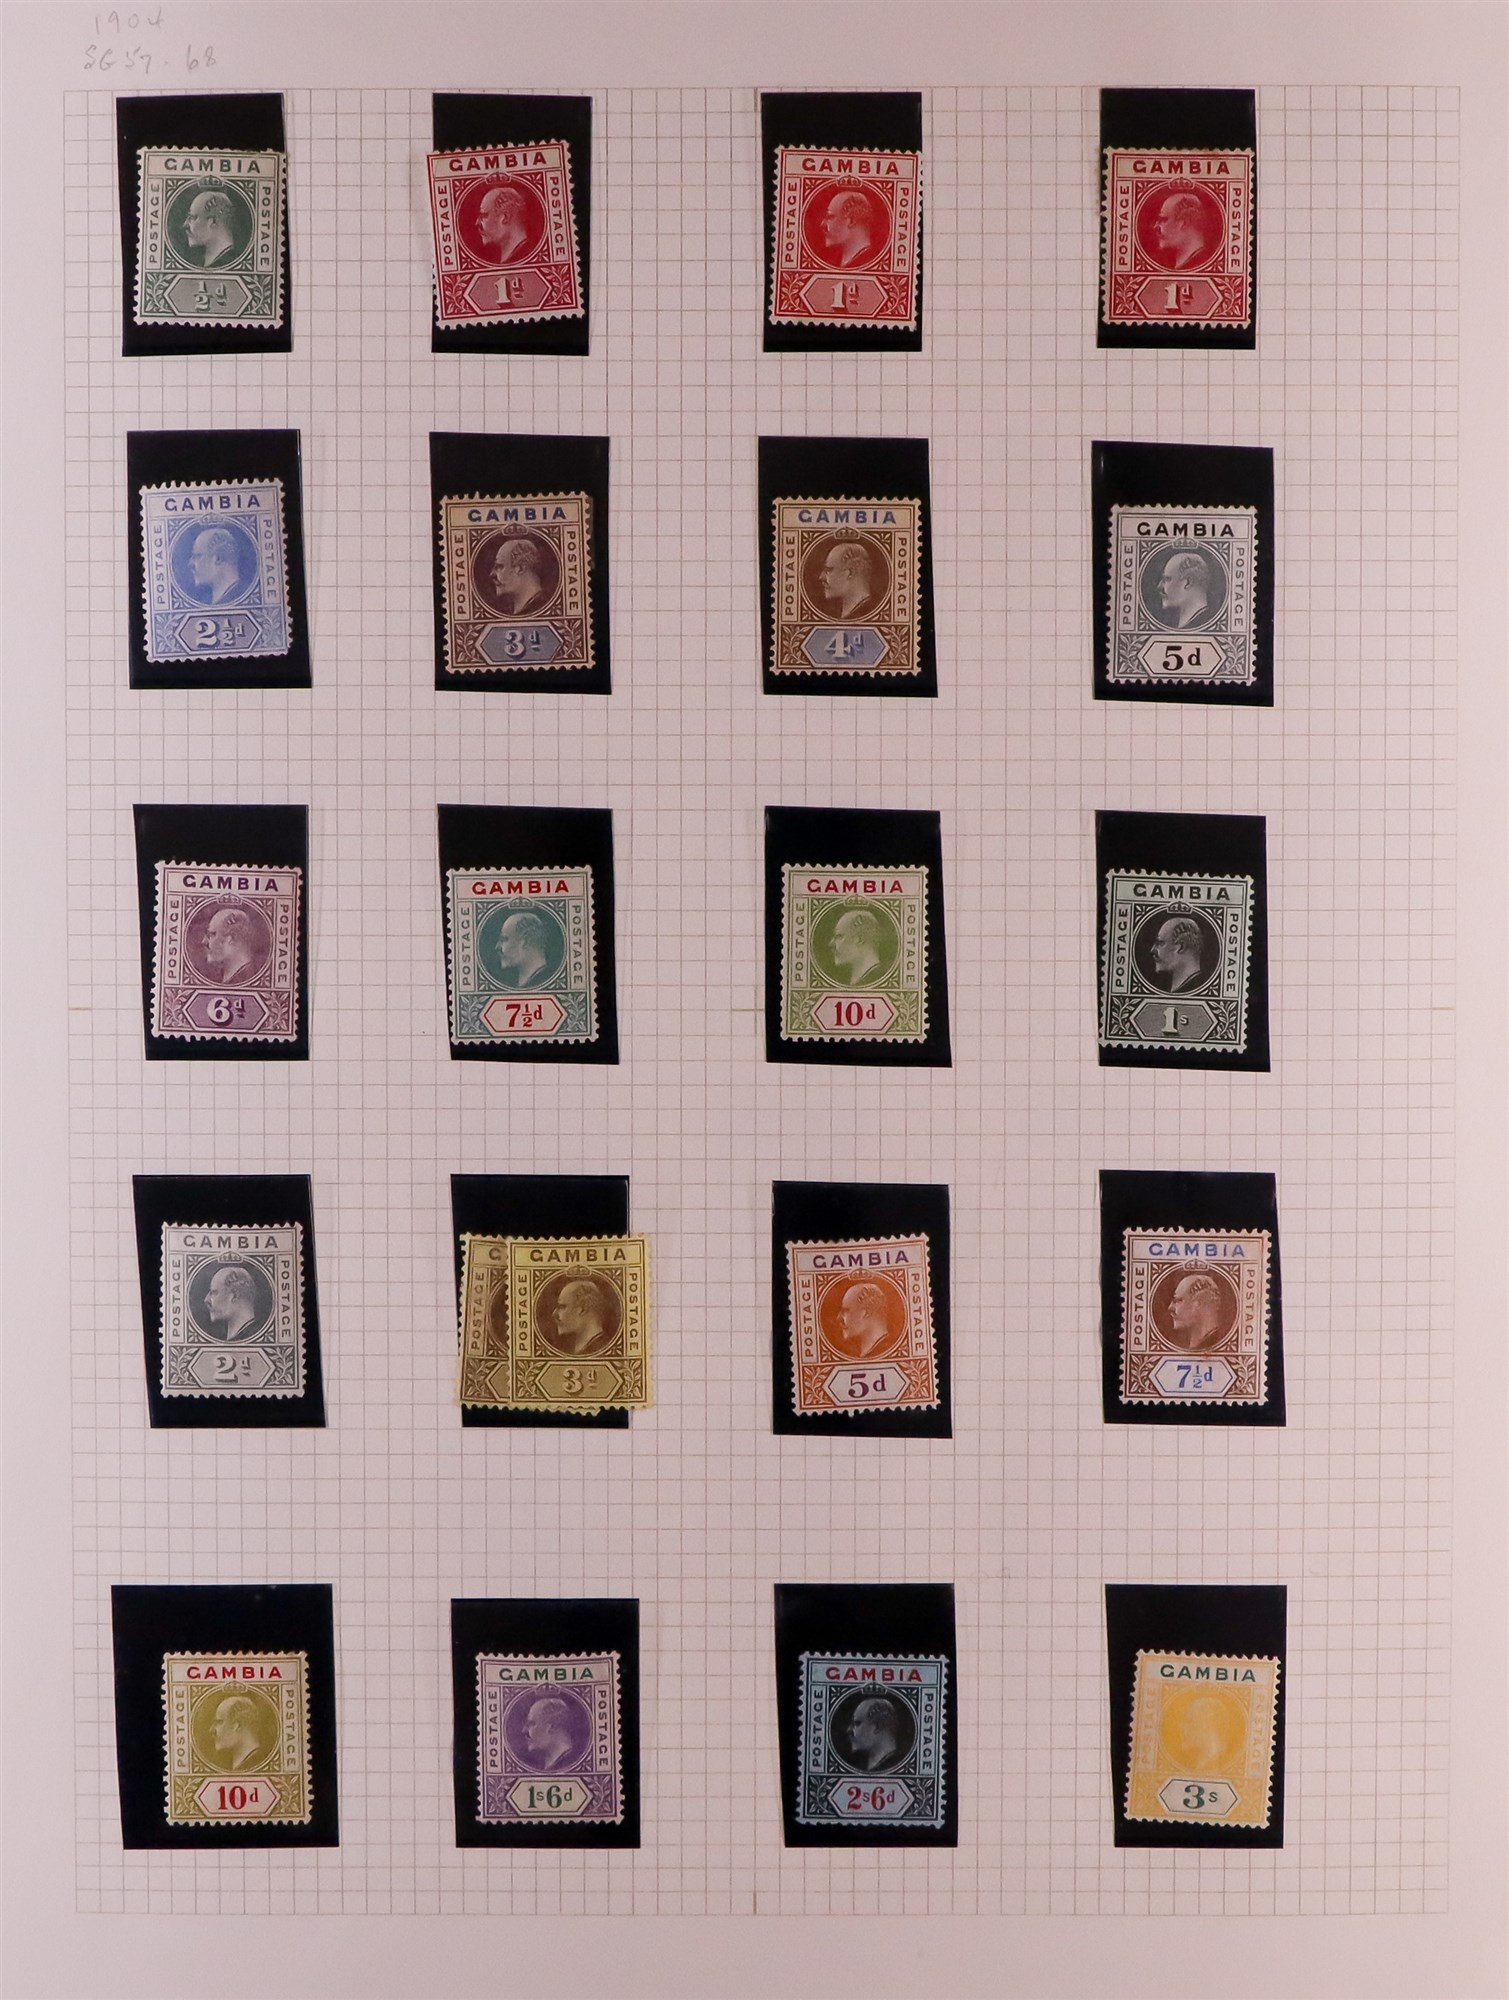 GAMBIA 1880 - 1935 COLLECTION incl. various Cameo issues mint, 1s violet used strip 3, 1902-05 set